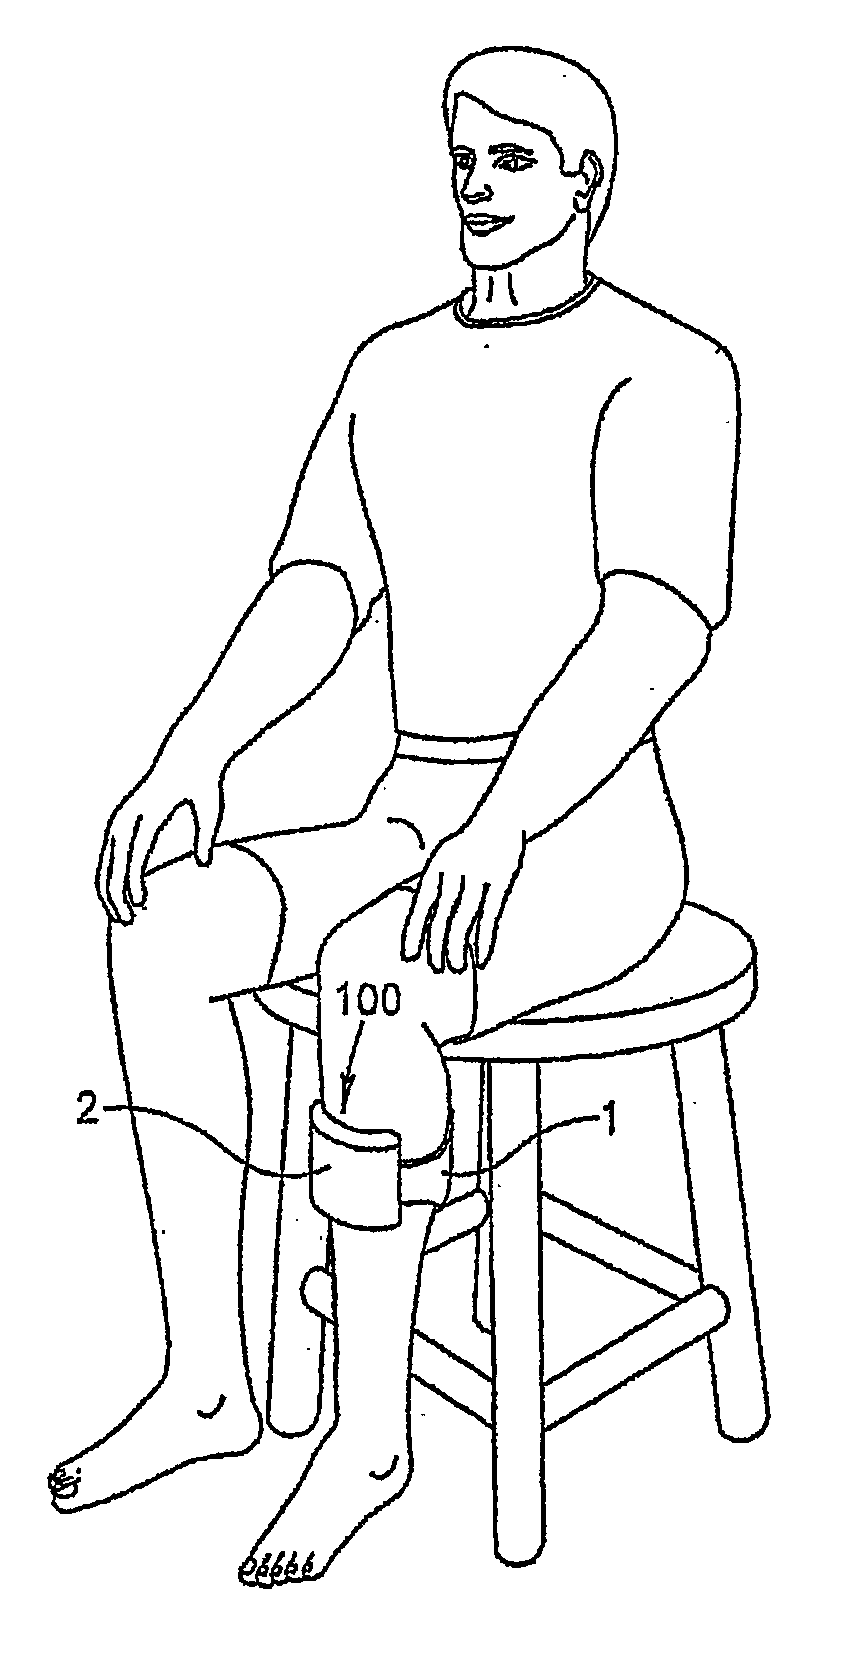 Method and system for external counterpulsation